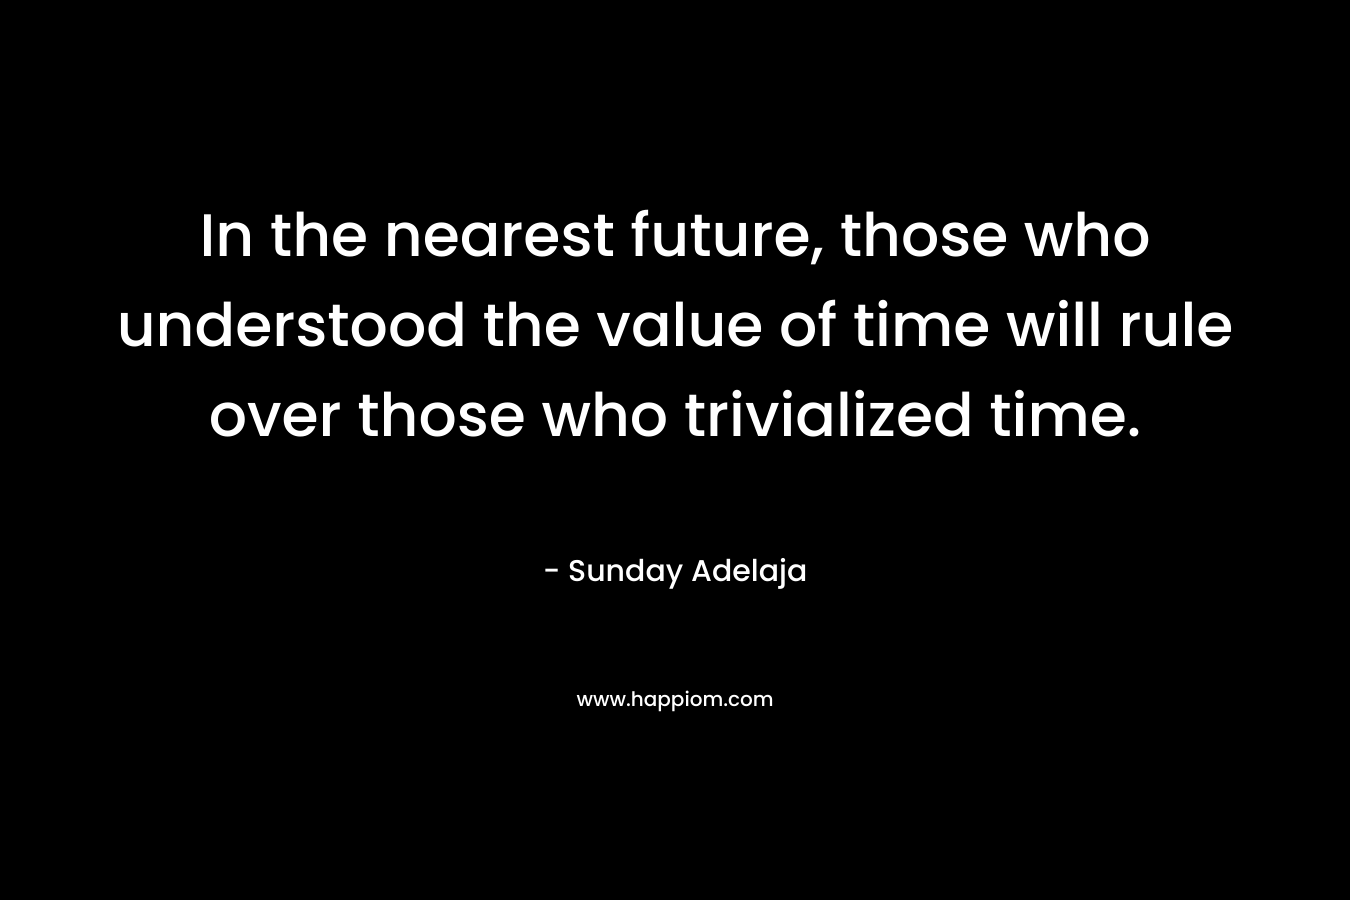 In the nearest future, those who understood the value of time will rule over those who trivialized time.